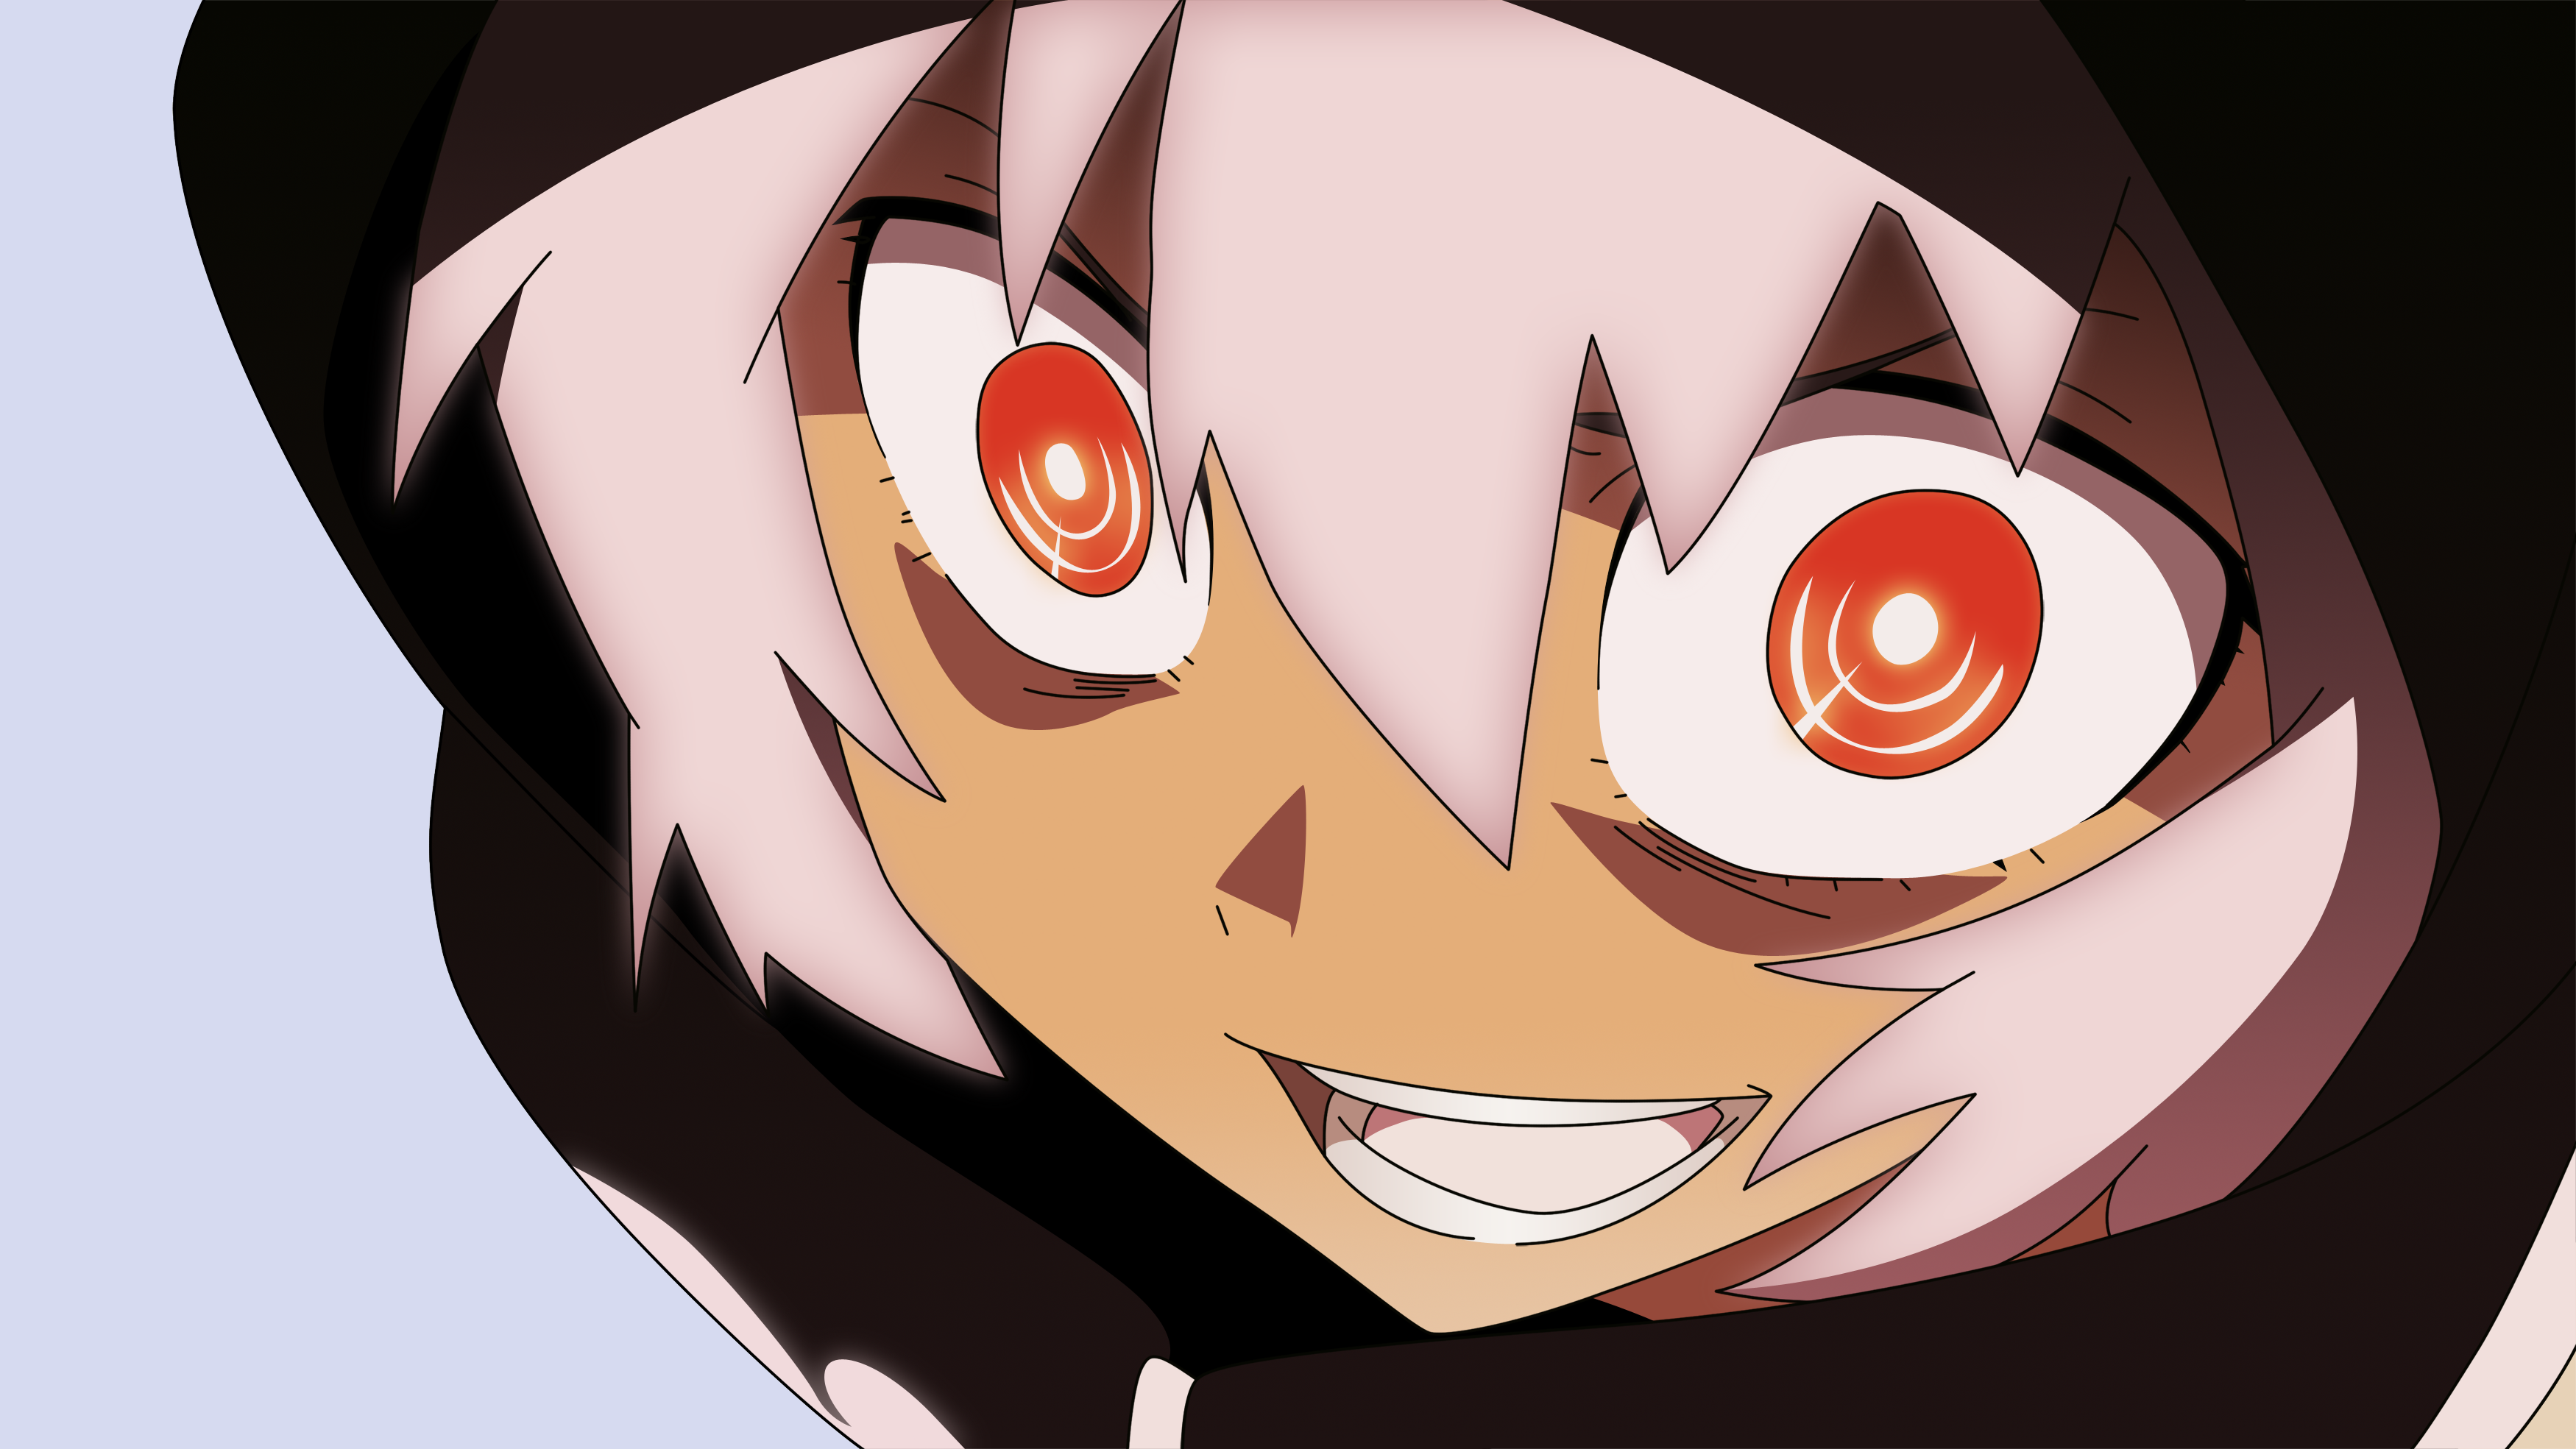 Crazy Anime Expressions Bases by HeroVictimVillain on DeviantArt